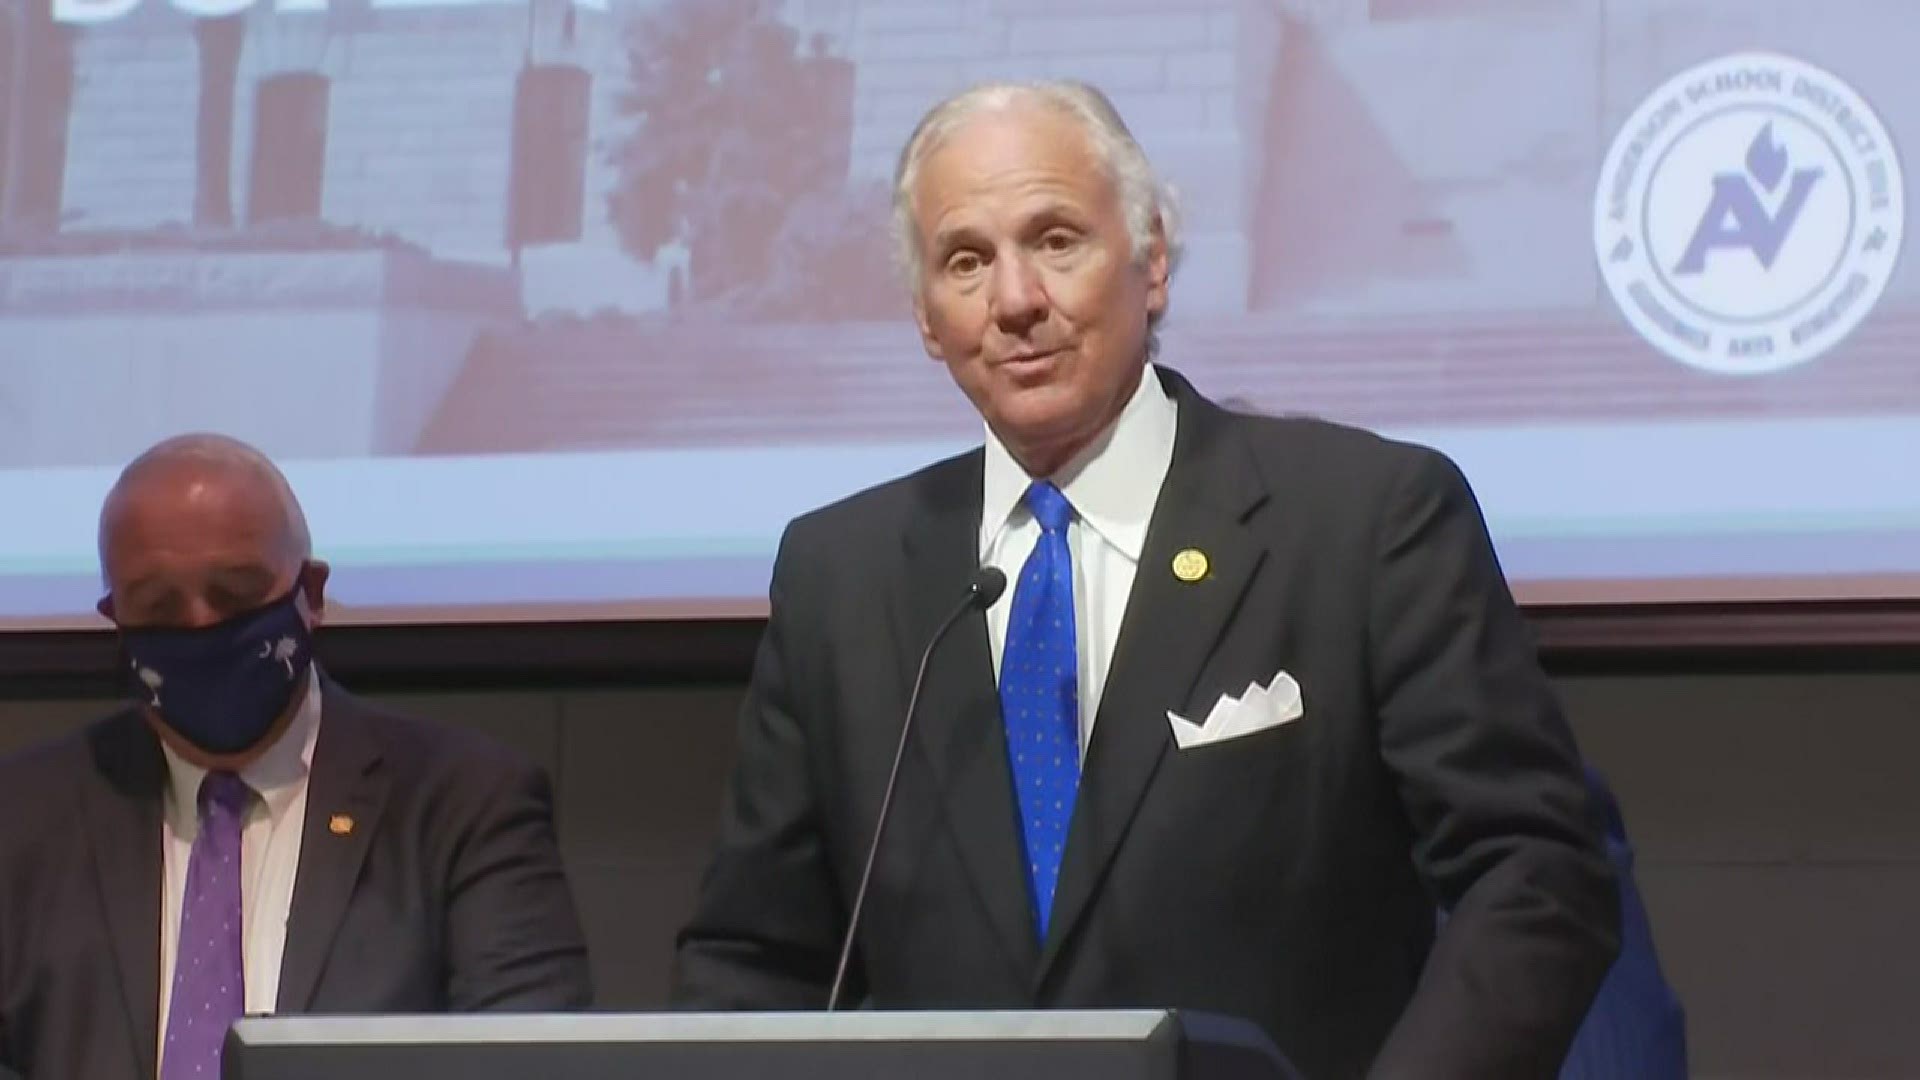 South Carolina Gov. Henry McMaster announced millions of dollars will be given to buy masks, face shields, glove, and other protective equipment.